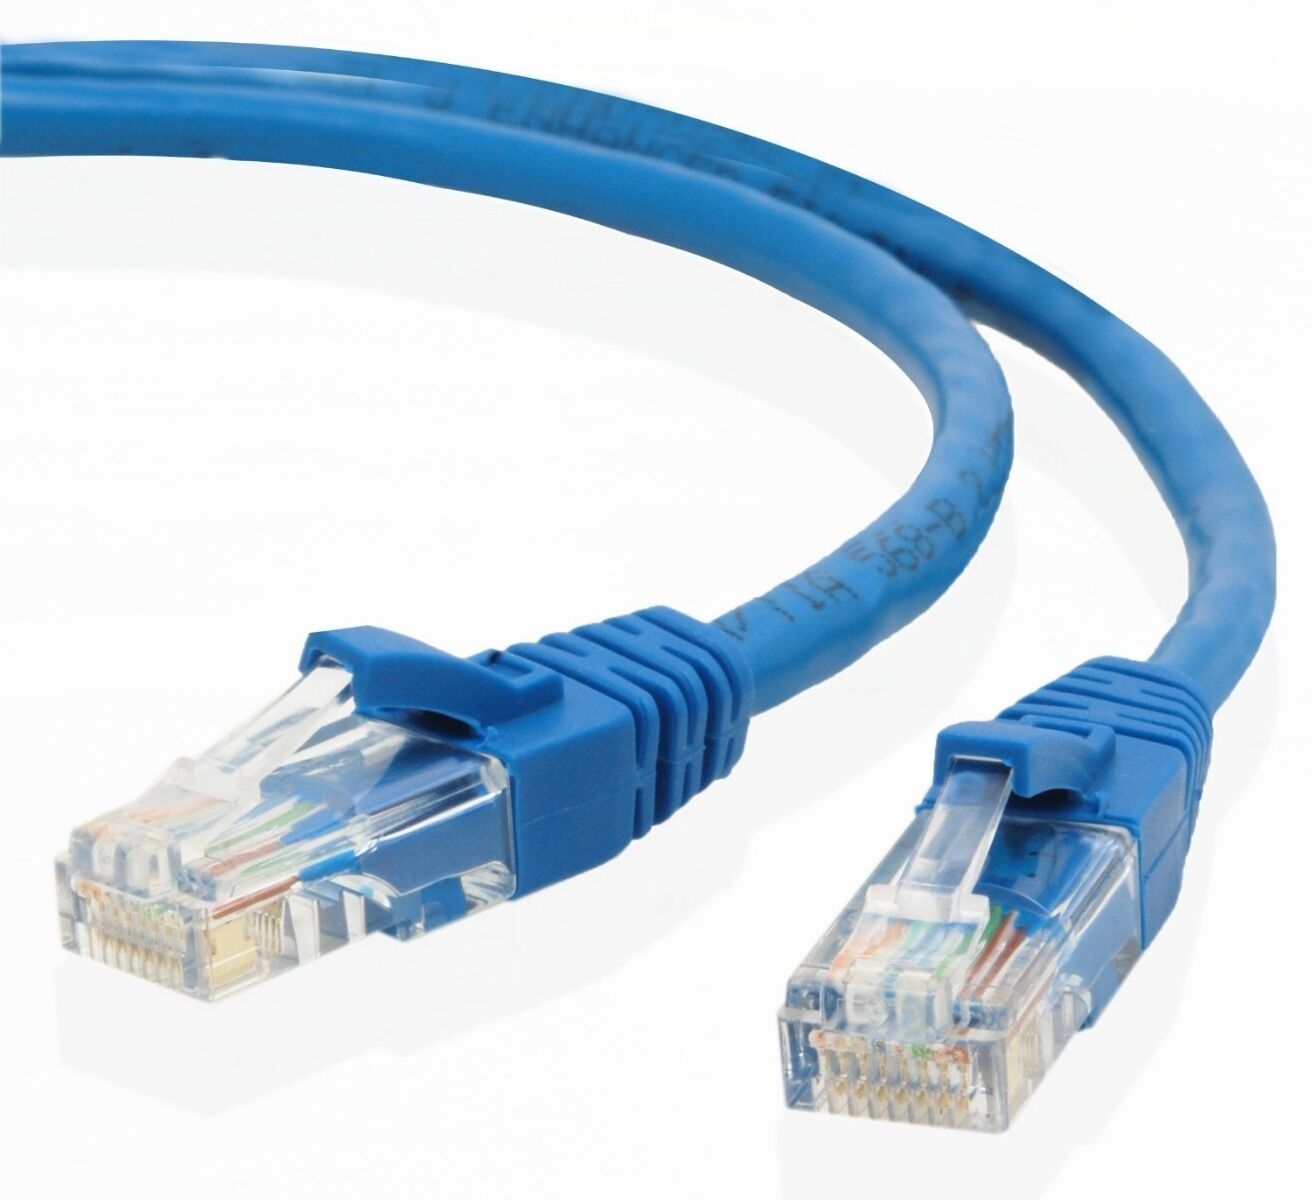 Etronic ® Networking Cat5e Patch Cable - (100 Feet) - Blue RJ45 USA